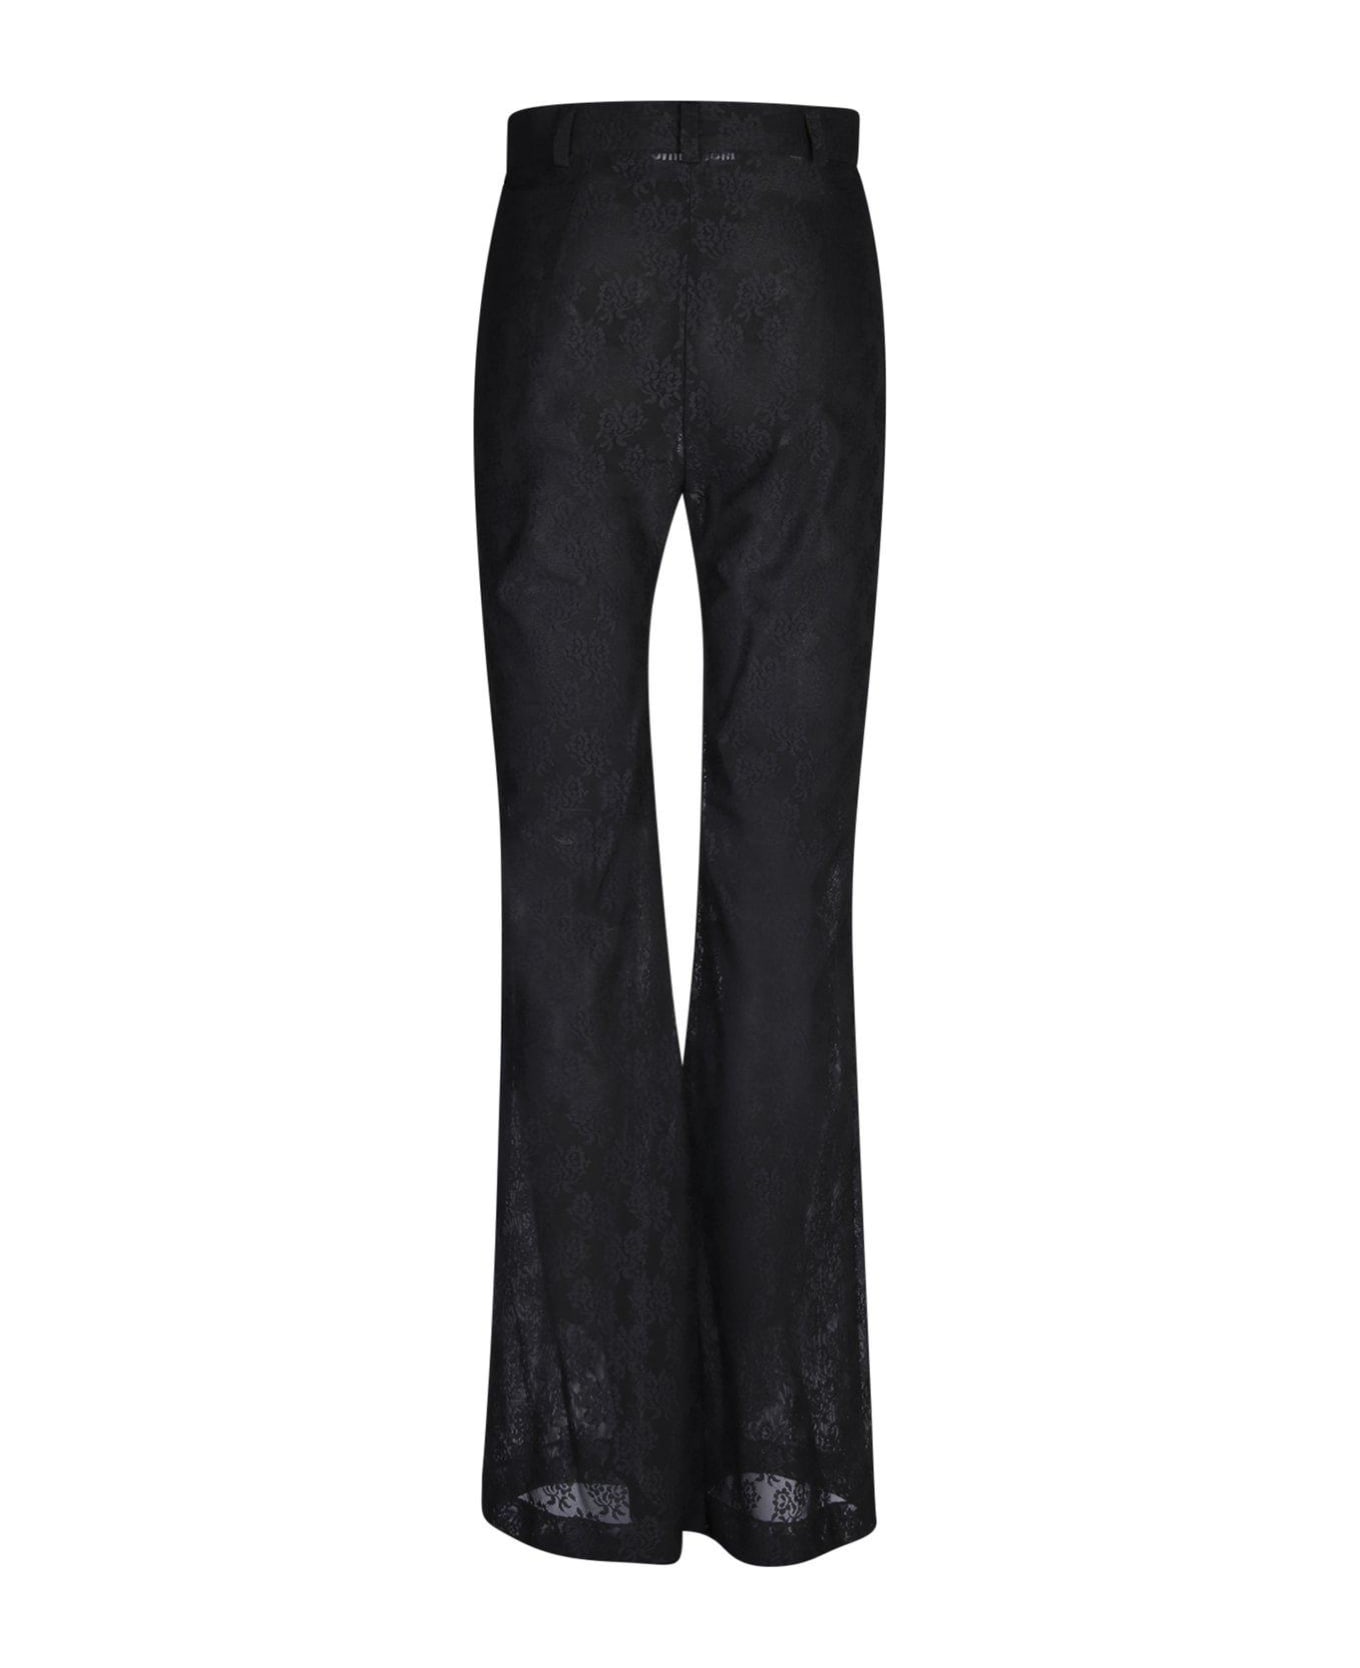 Moschino High-waist Floral-laced Sheer Flared Trousers - BLACK